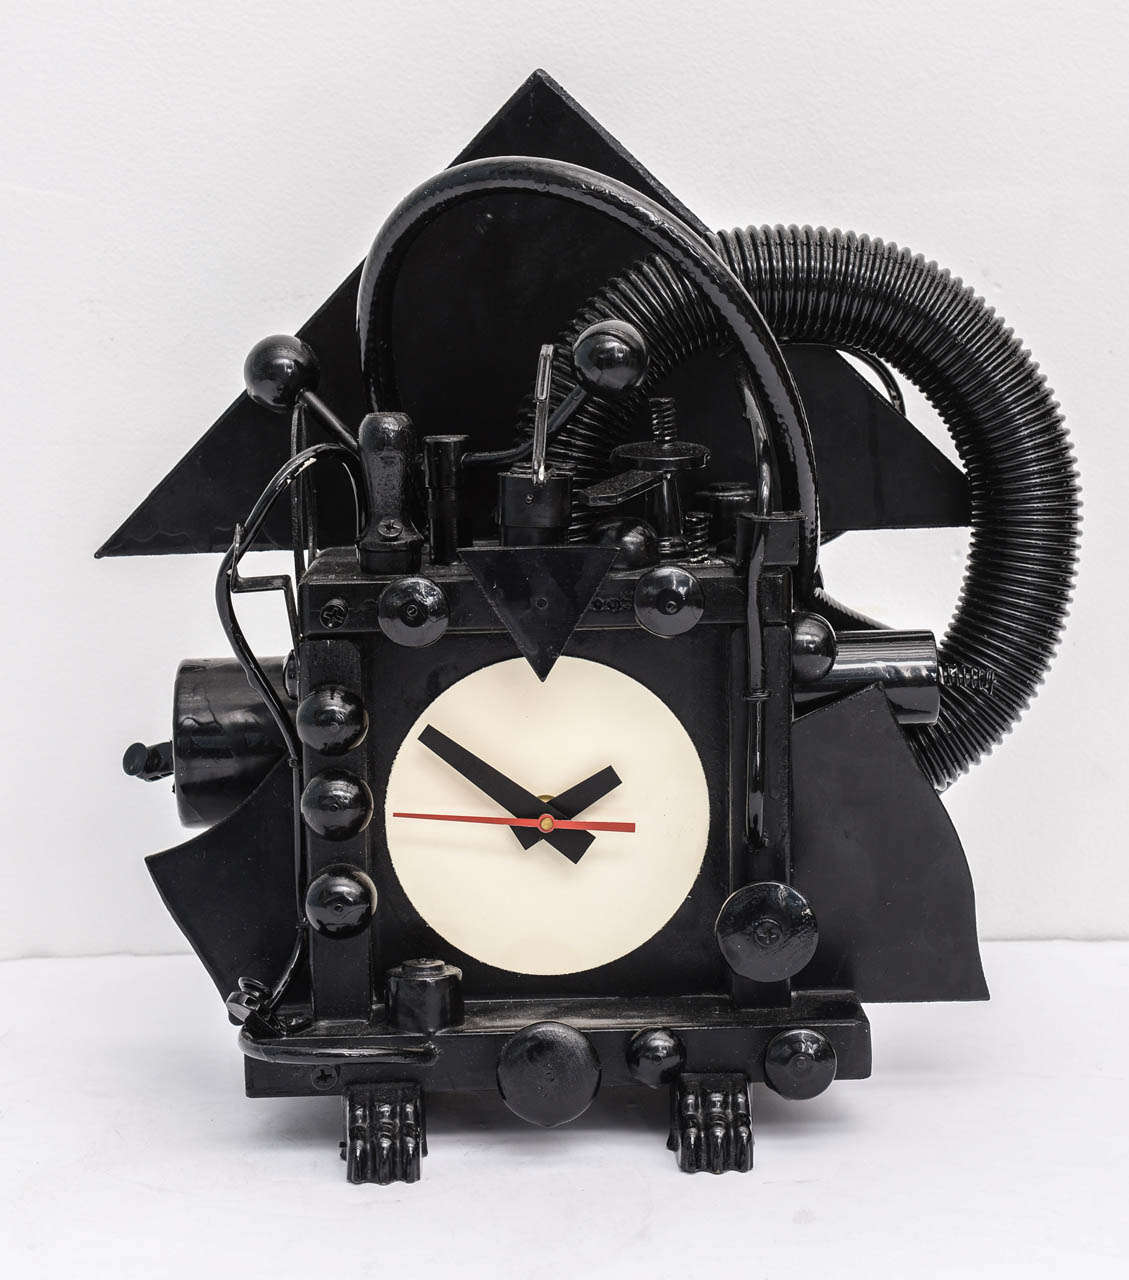 A vintage clock by Artist Richard Birkett, wood construction and other materials such as plastic and metal all finished in a glossy black make this art time piece a unique and It has Mr. Birkett style and artistry signature. It is signed and dated